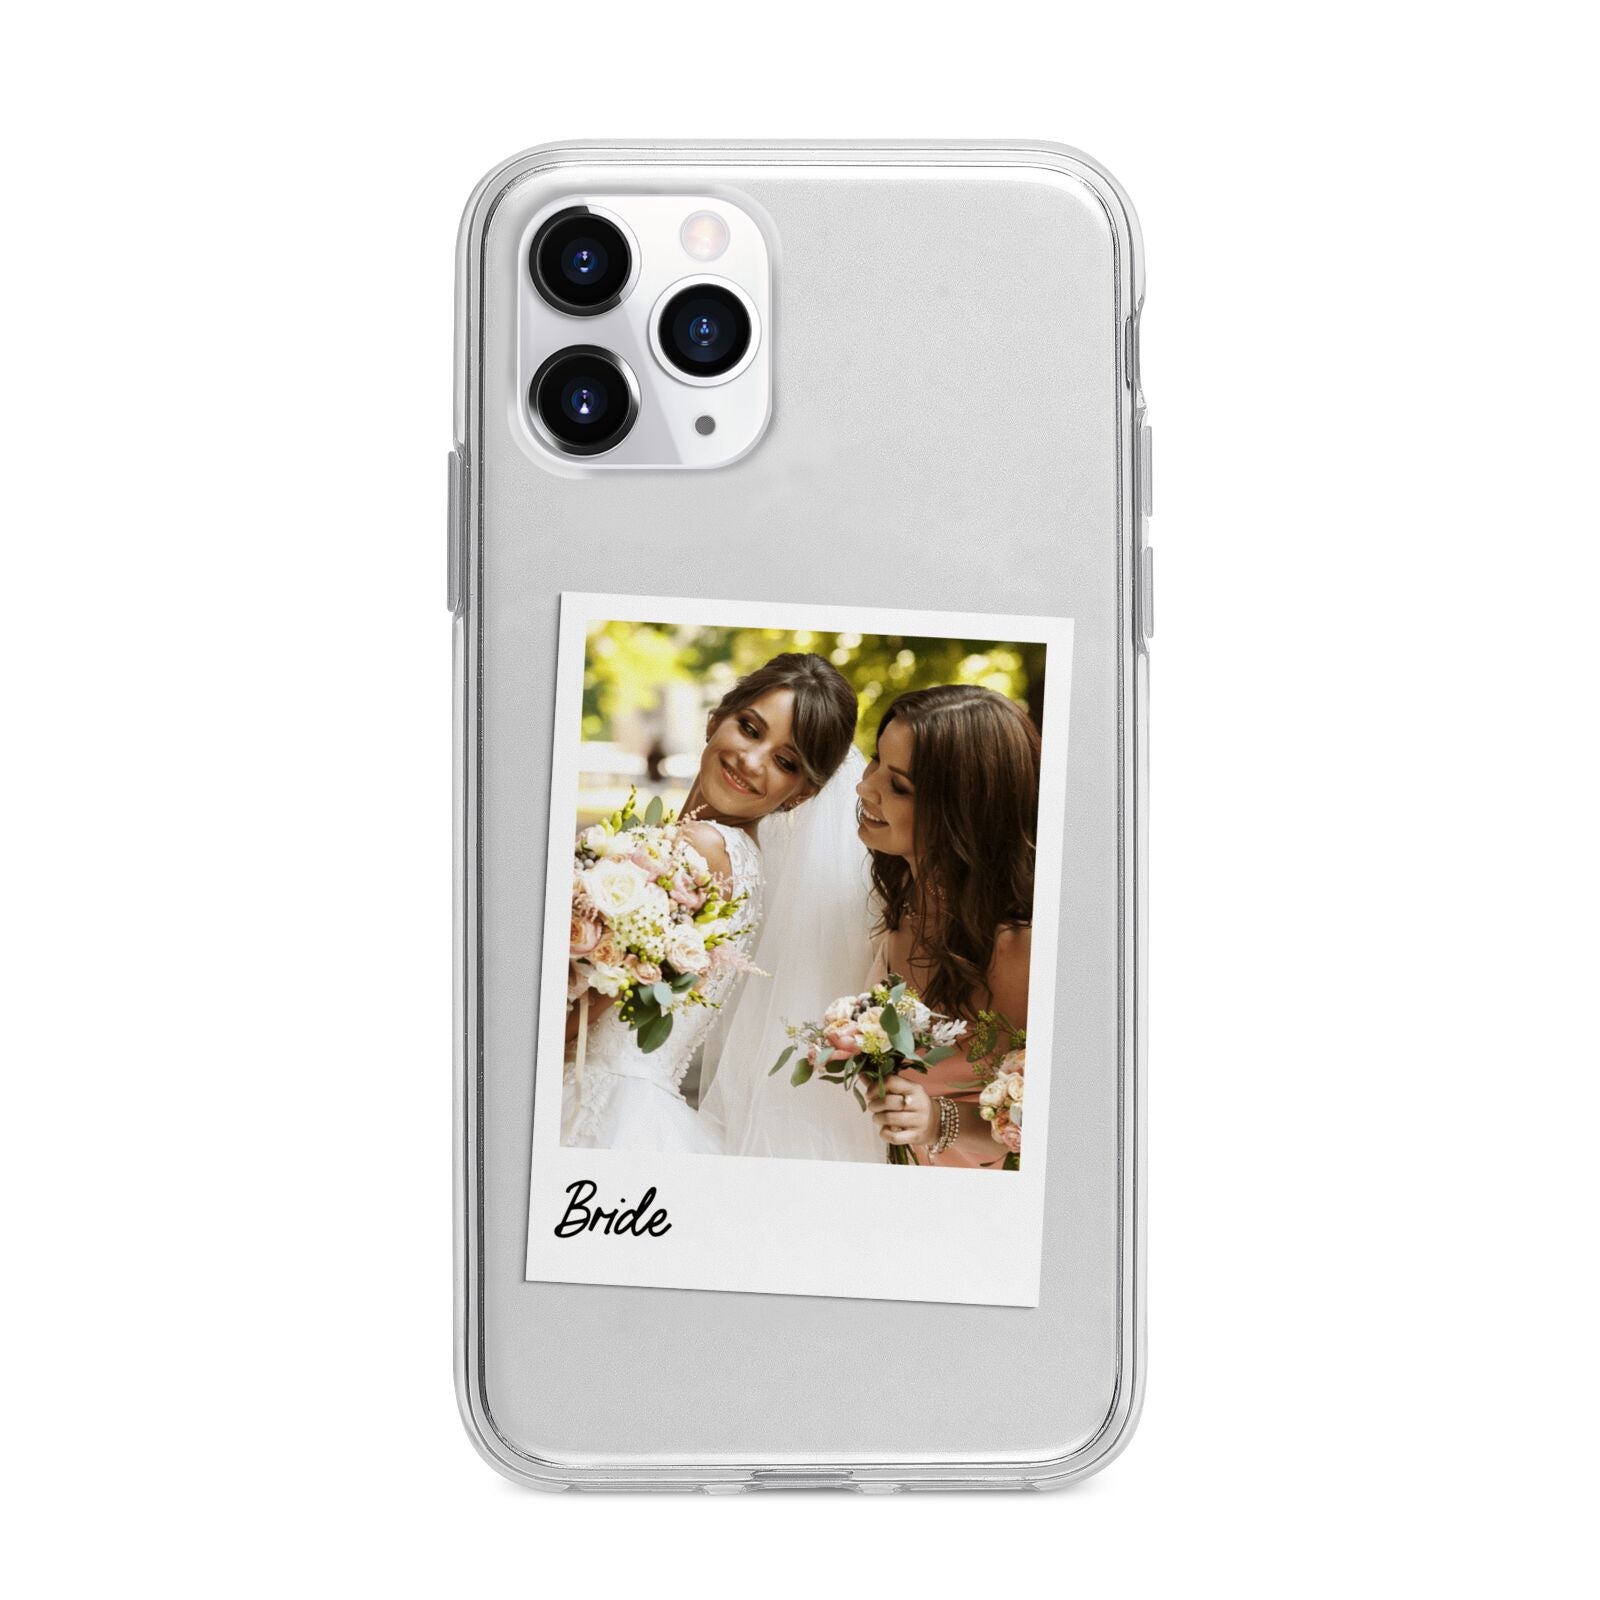 Bridal Photo Apple iPhone 11 Pro in Silver with Bumper Case